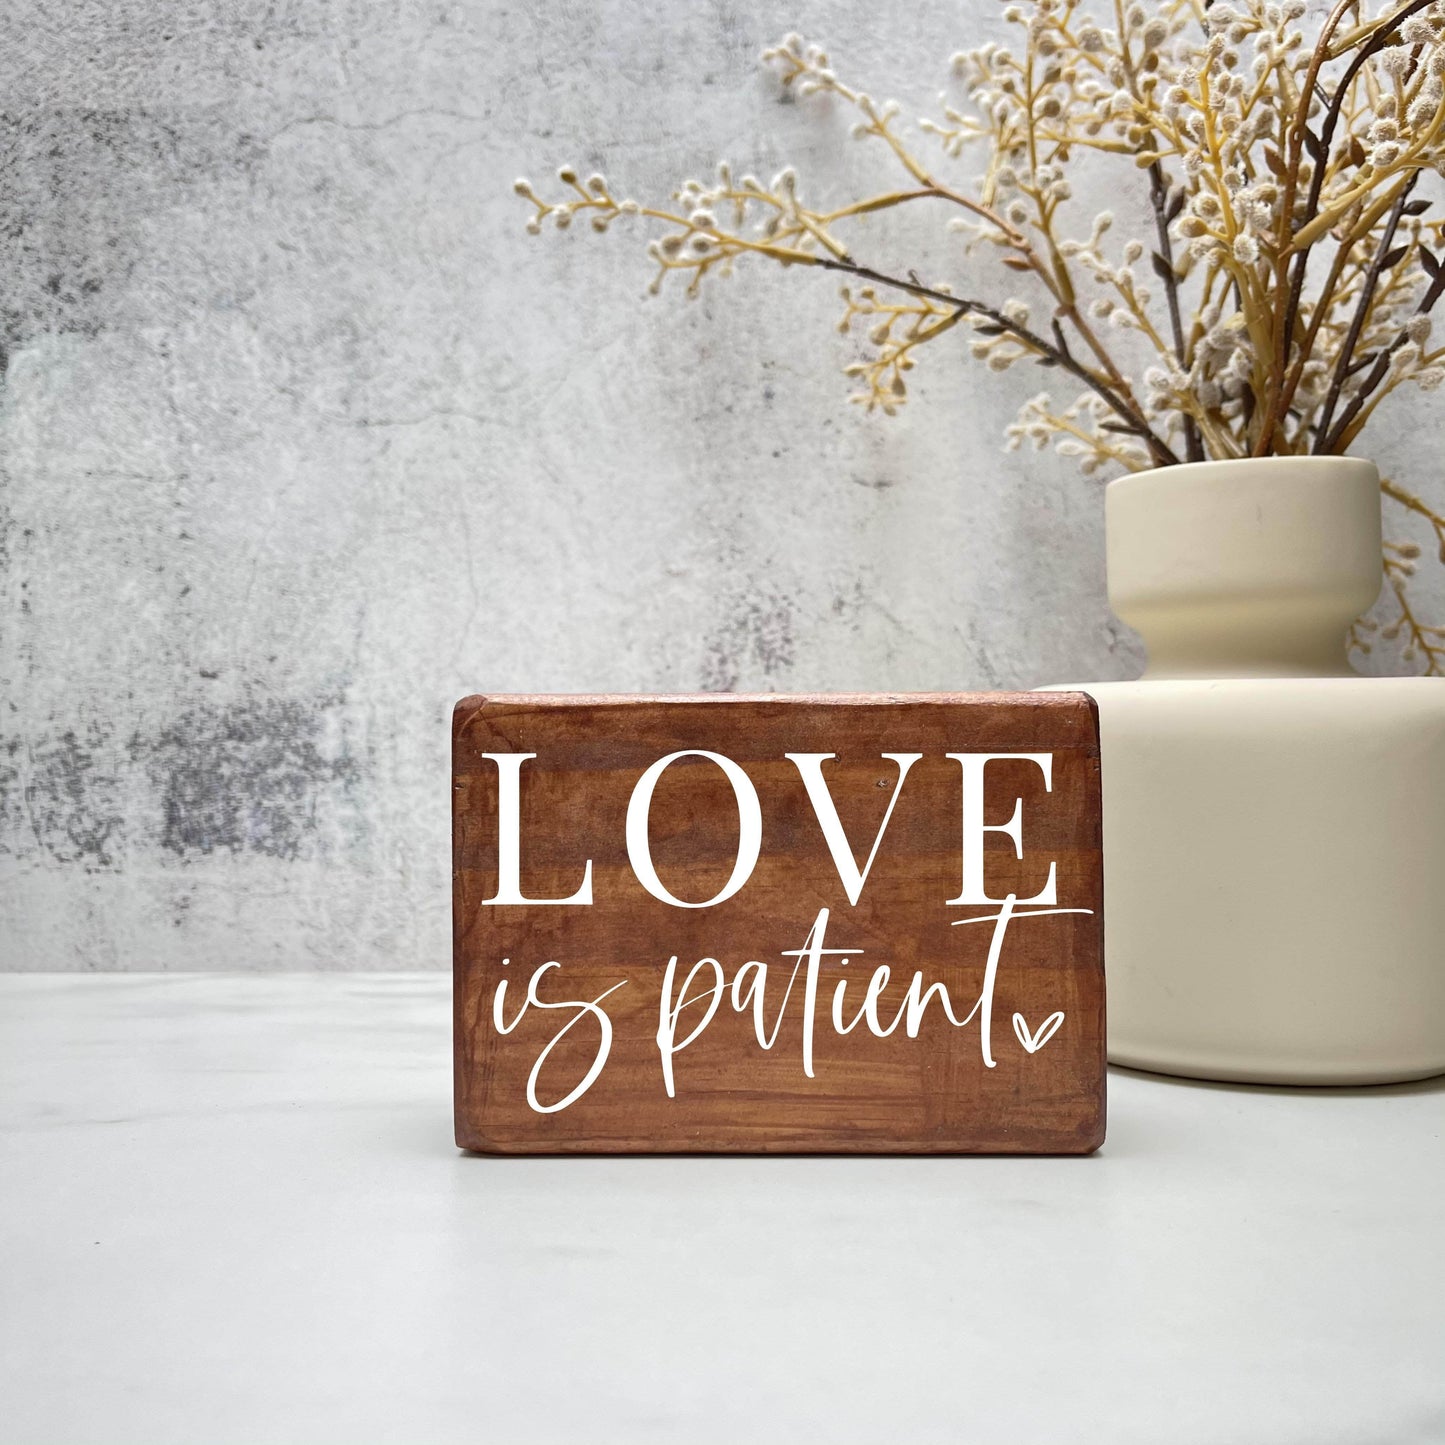 Love is patient wood sign, love sign, couples gift sign, quote sign, home decor